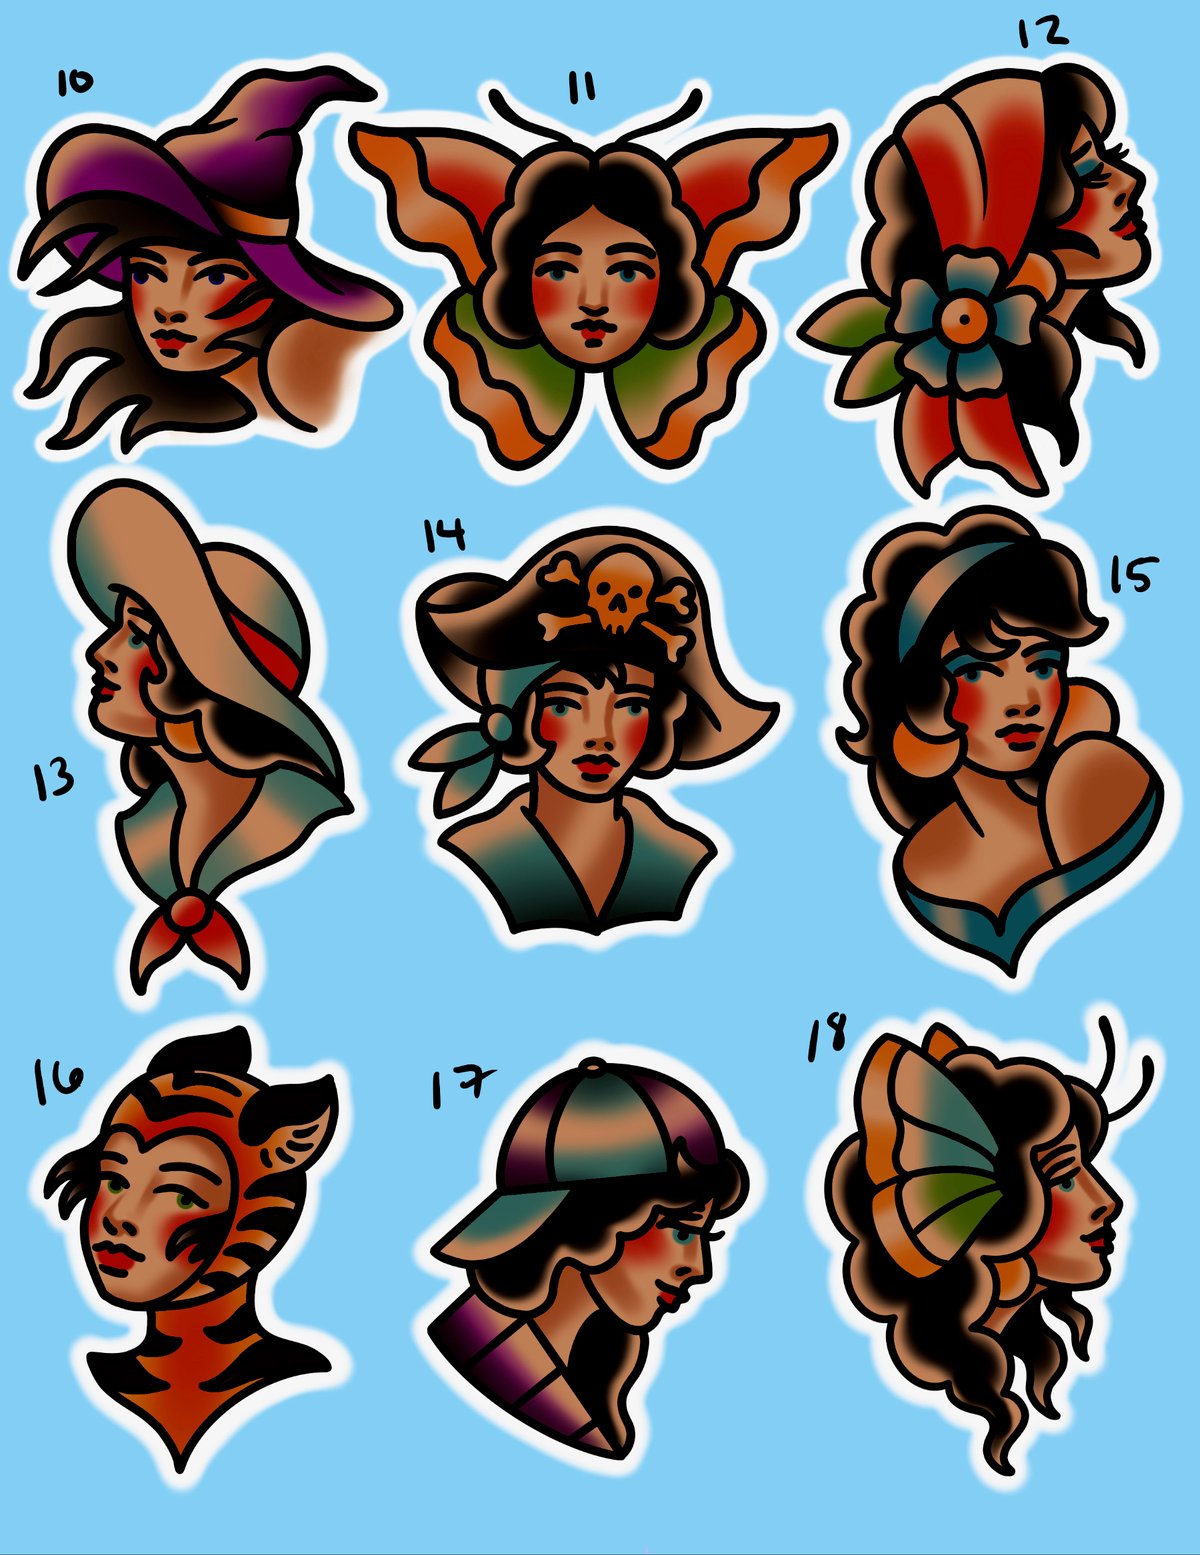 Image of 10 - 18 Lady Heads w/ Melanated Option & FREE COLOR TEST